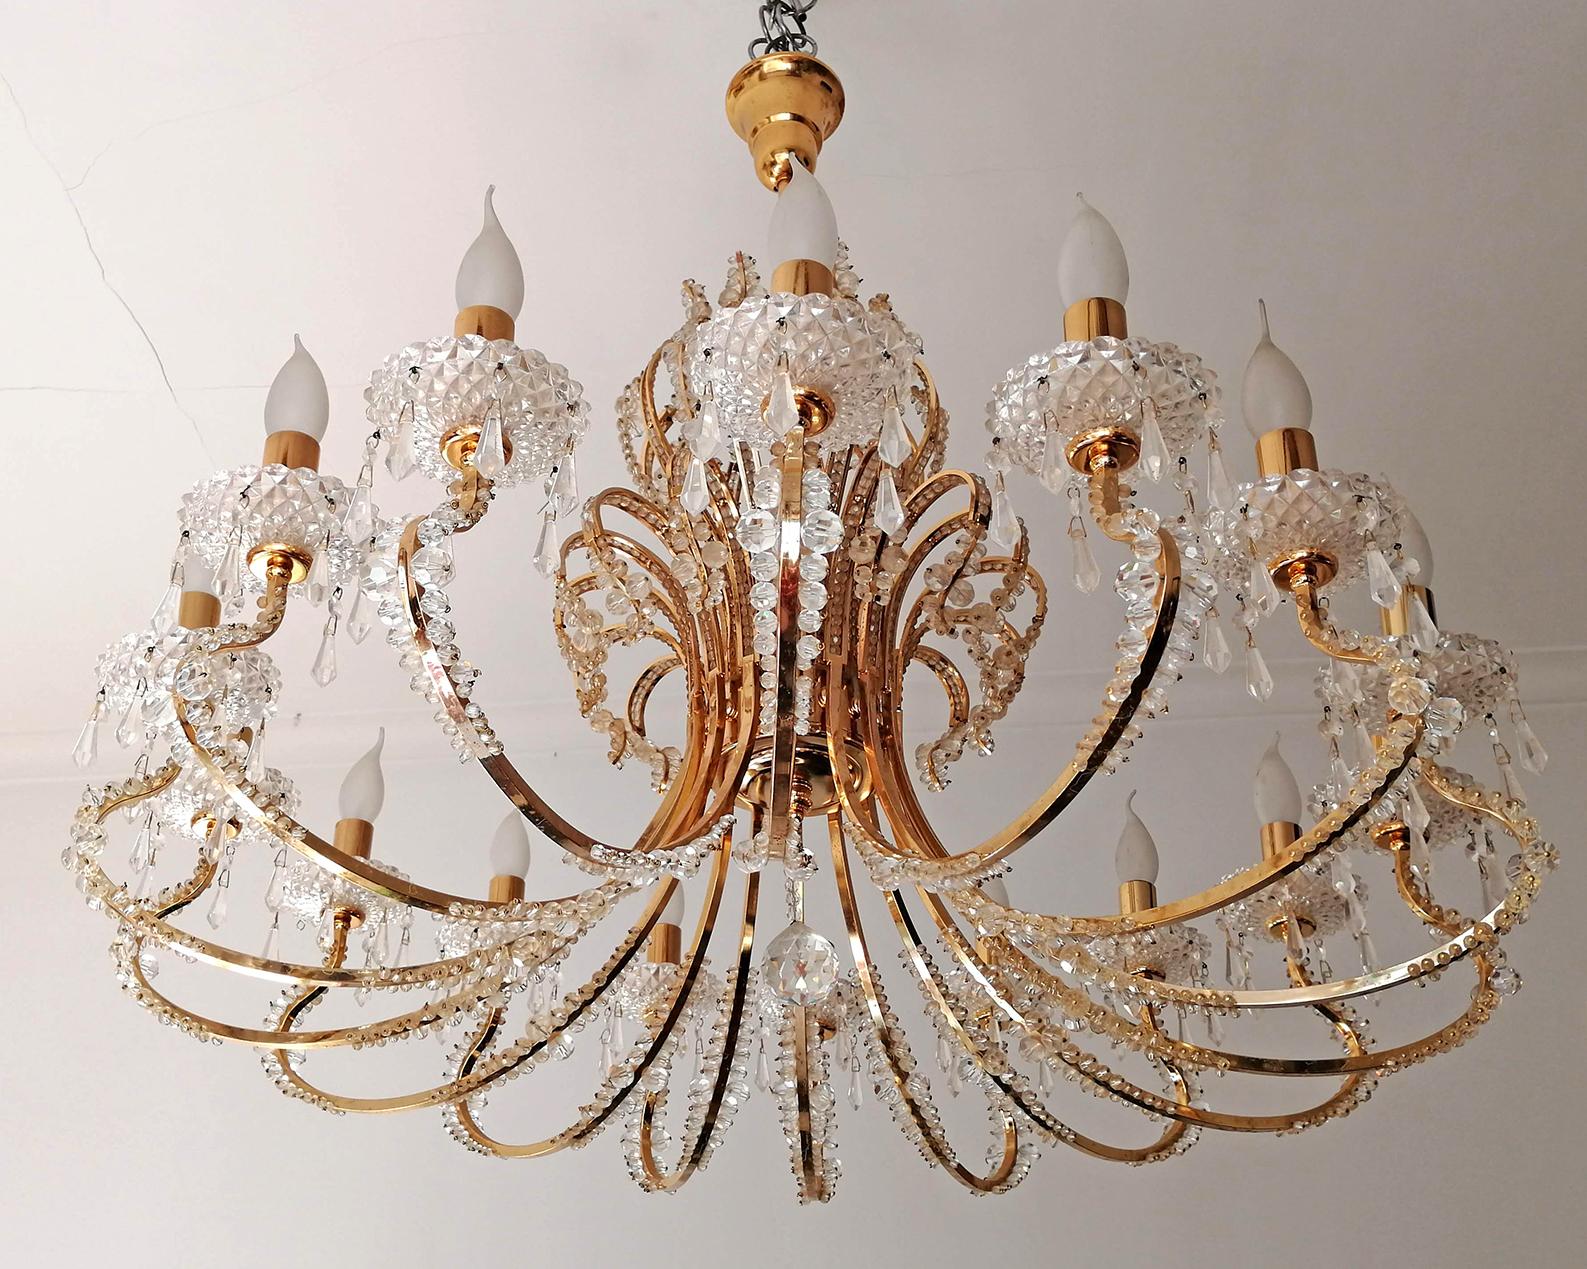 Stunning extra large impressive Empire cut crystal and gilt brass 19-light chandelier with crystal drops.
Measures:
Diameter 37.8 in/ 96 cm
Height 35.5 in / 90 cm
Weight 44 lb/20 Kg
19 light bulbs E14/ good working condition.
Assembly